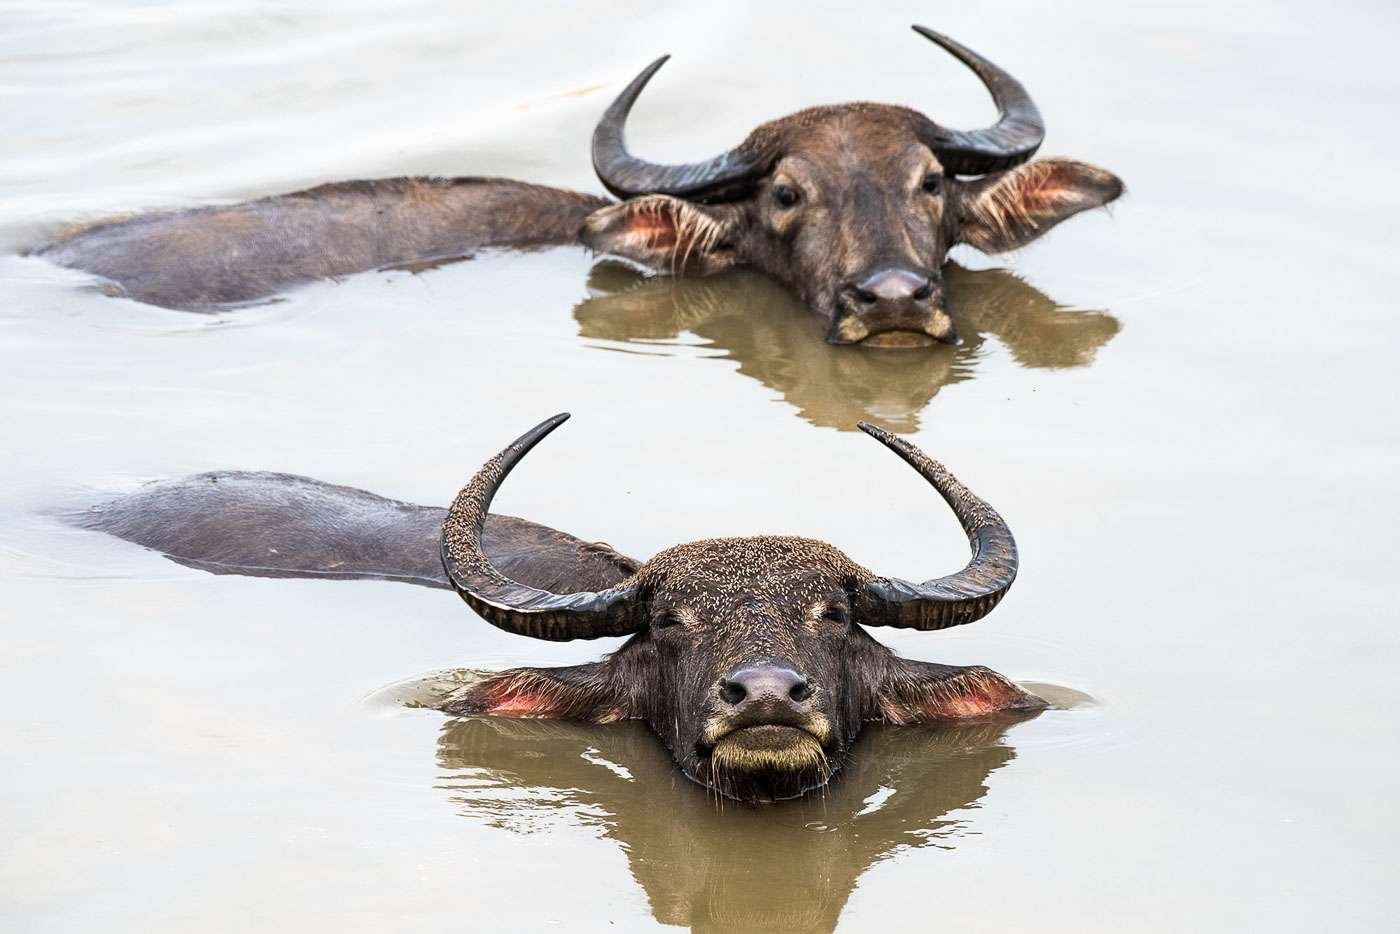 The water buffalo are plagued by flying insects — mosquitoes and flies.